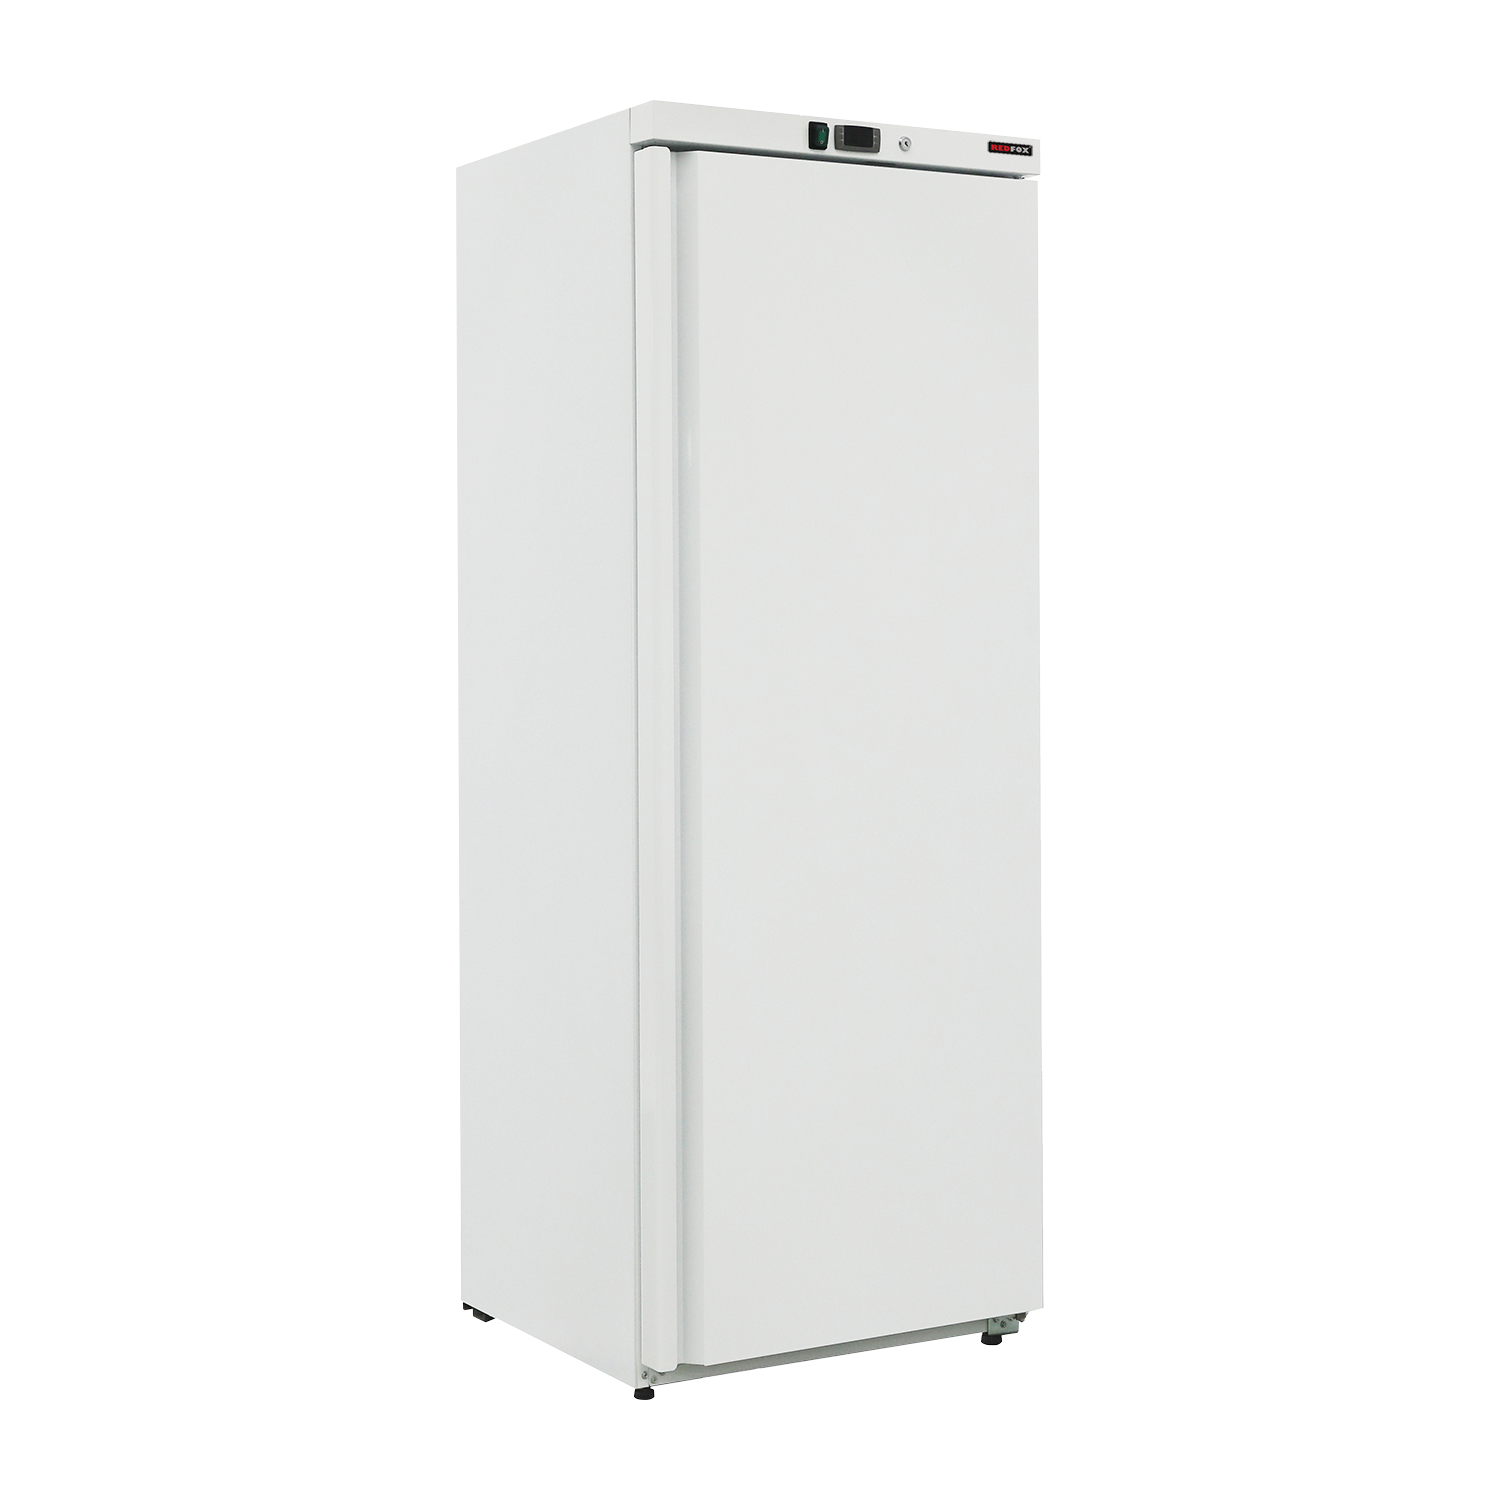 Cooling cabinet 350 l, white | REDFOX - DRR 400